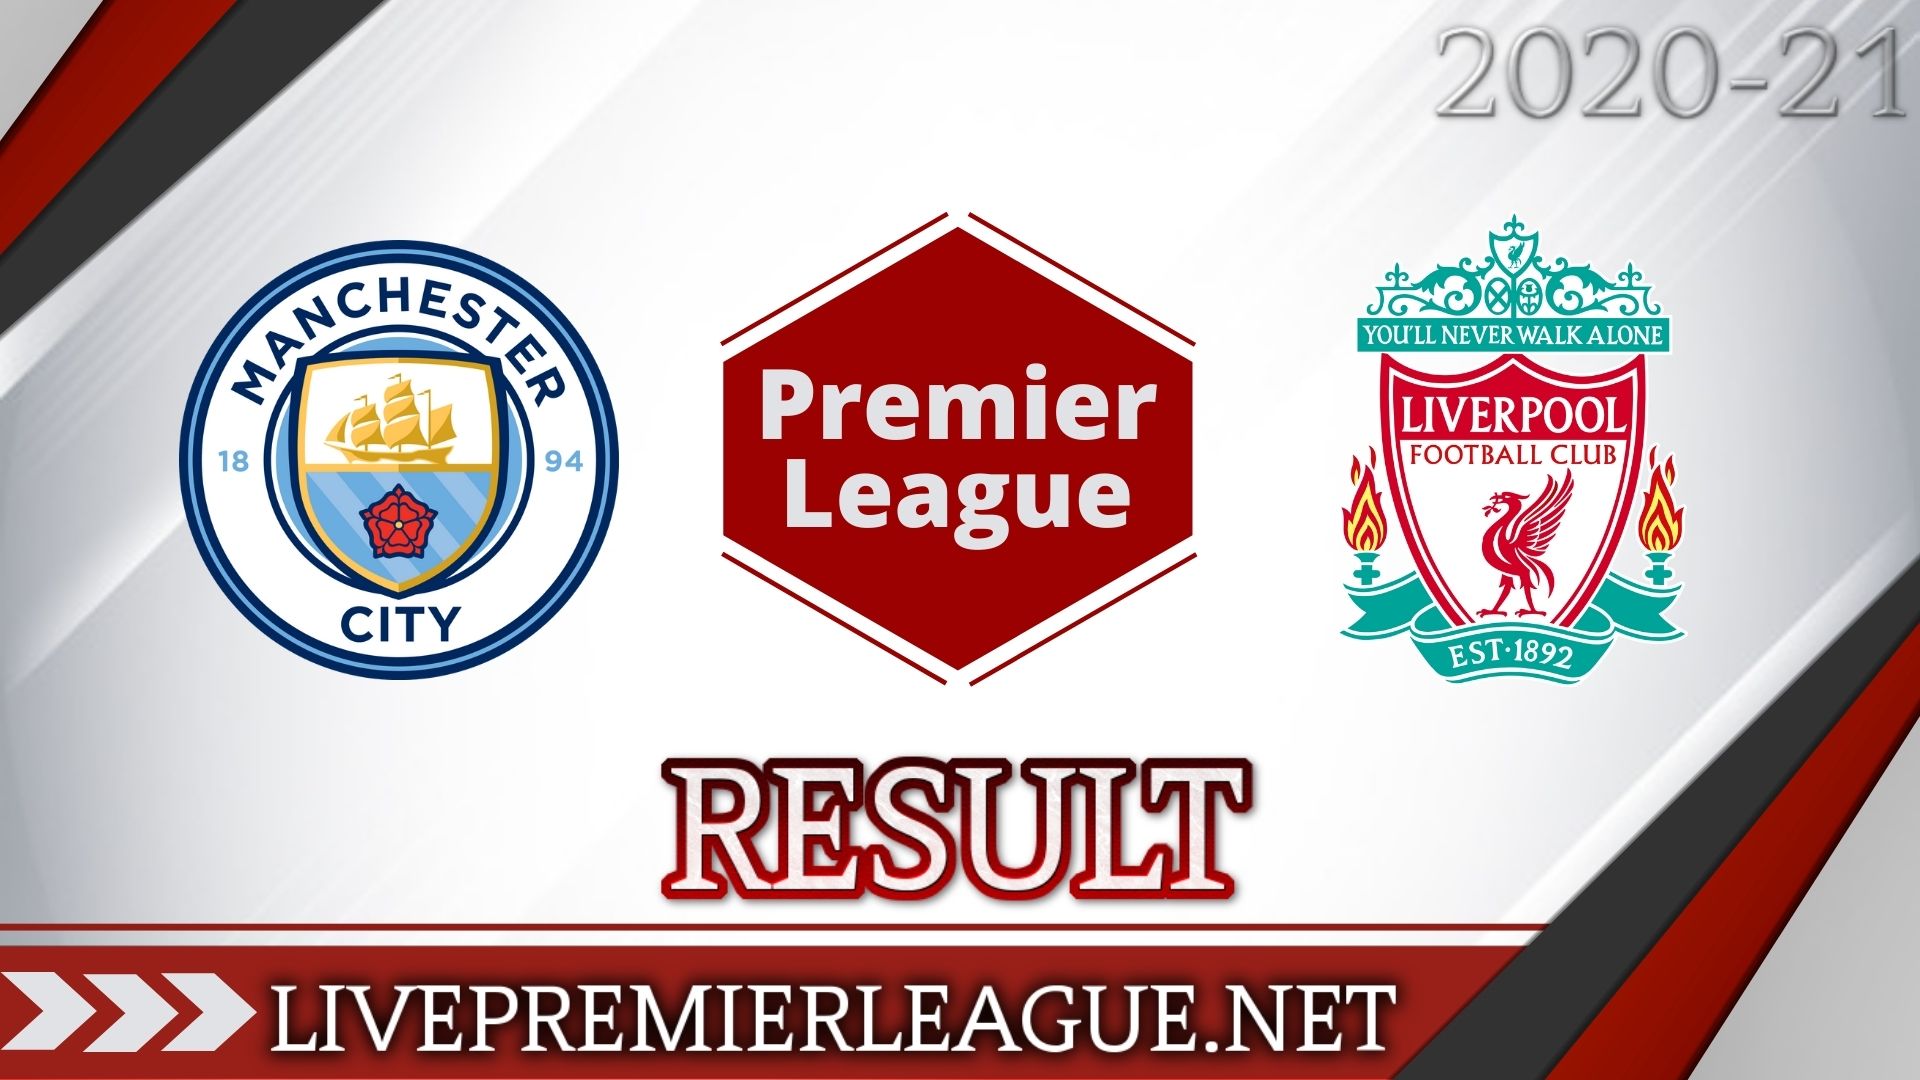 Manchester City Vs Liverpool | Week 8 Result 2020